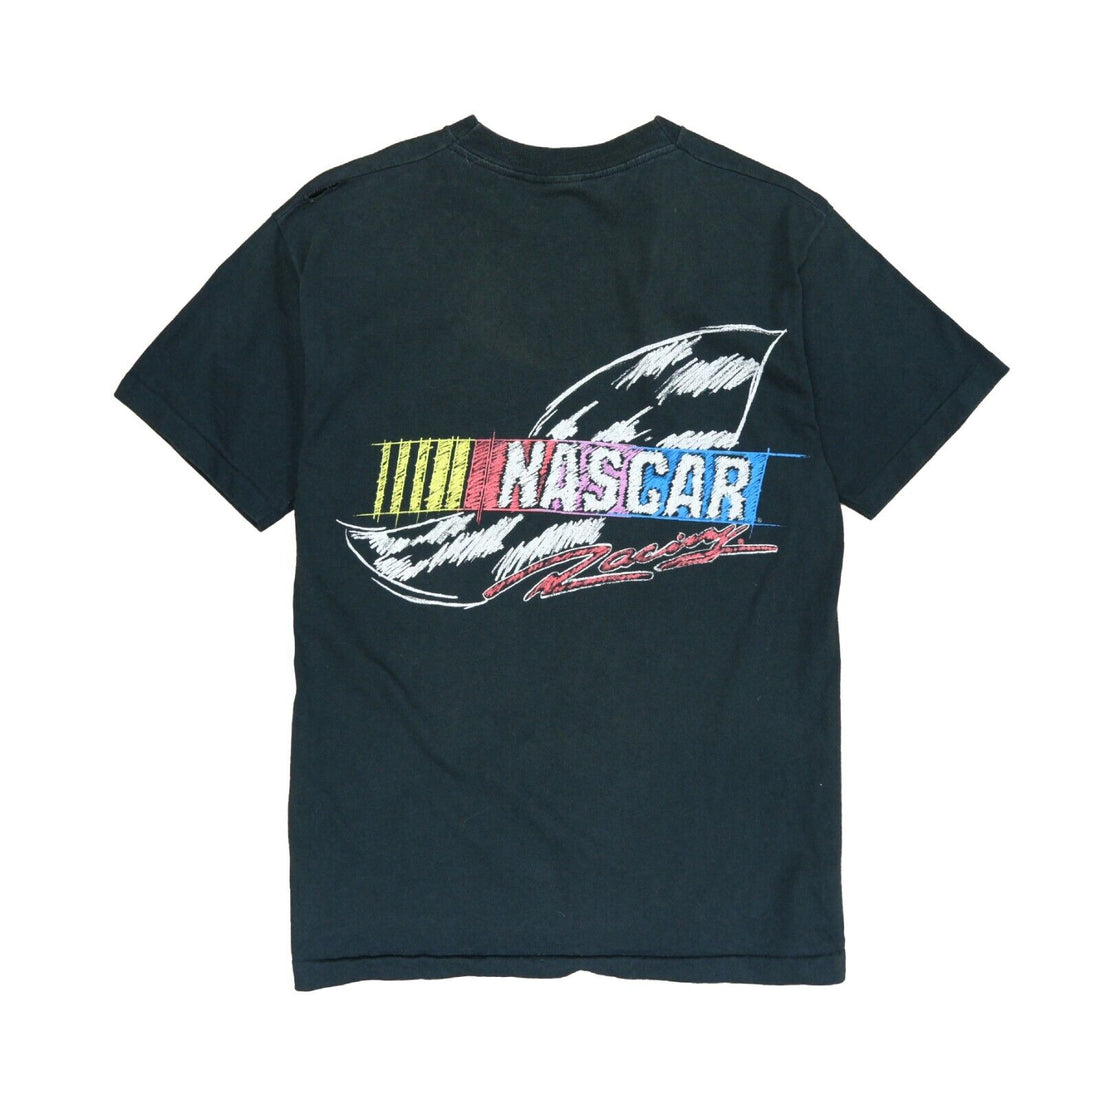 Vintage The Art of Speed Racing T-Shirt Size Large Black 1997 90s NASCAR